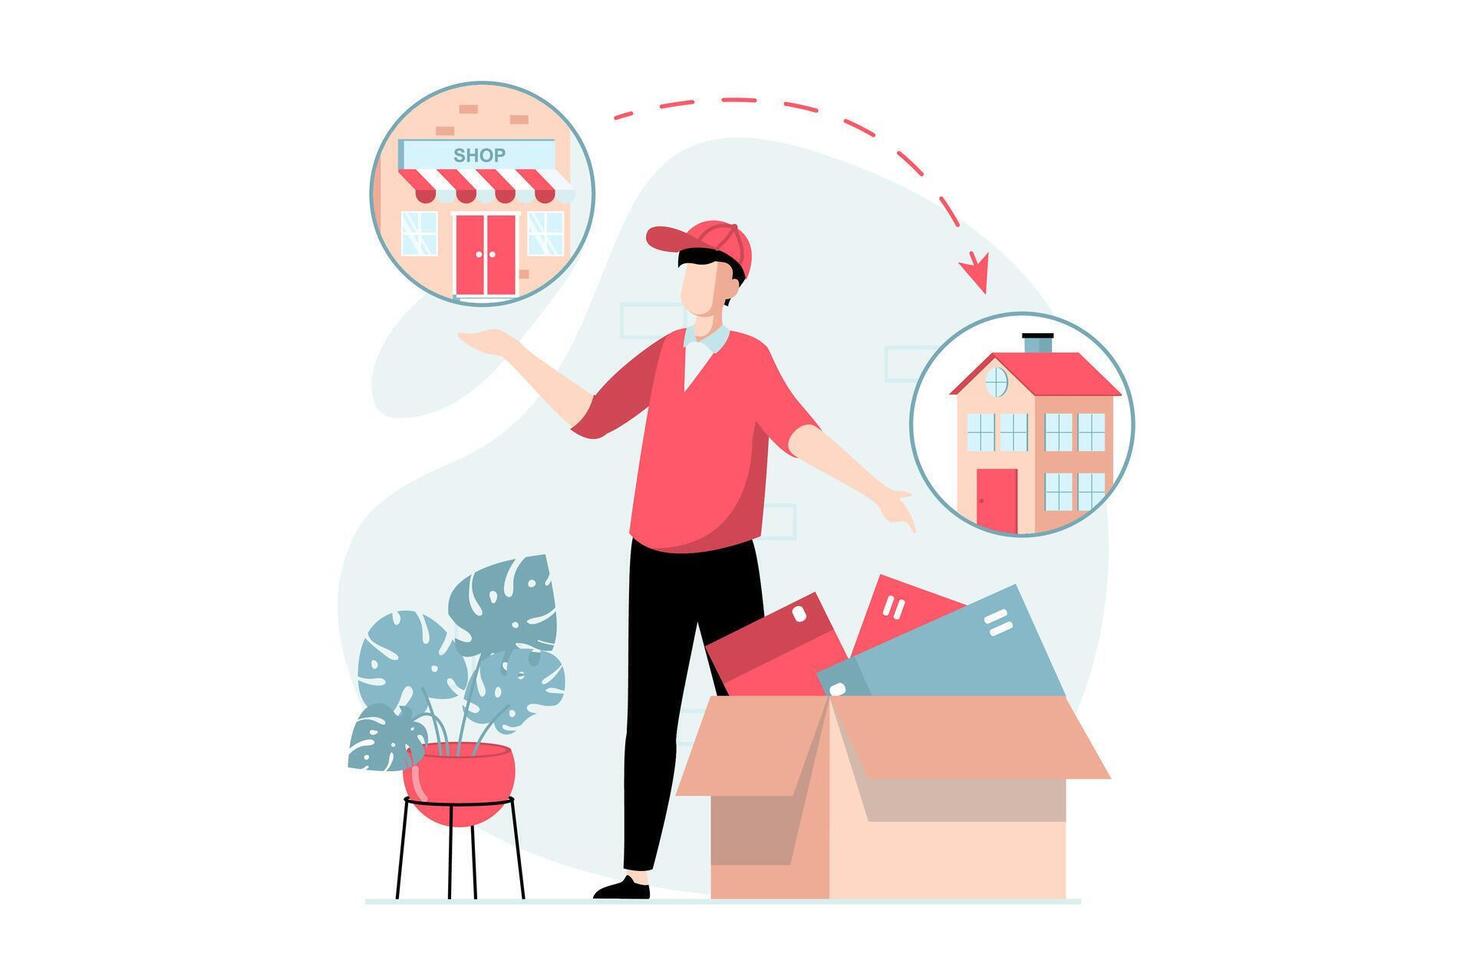 Delivery service concept with people scene in flat design. Man courier delivers goods ordered from online store and parcels to customer home. illustration with character situation for web vector